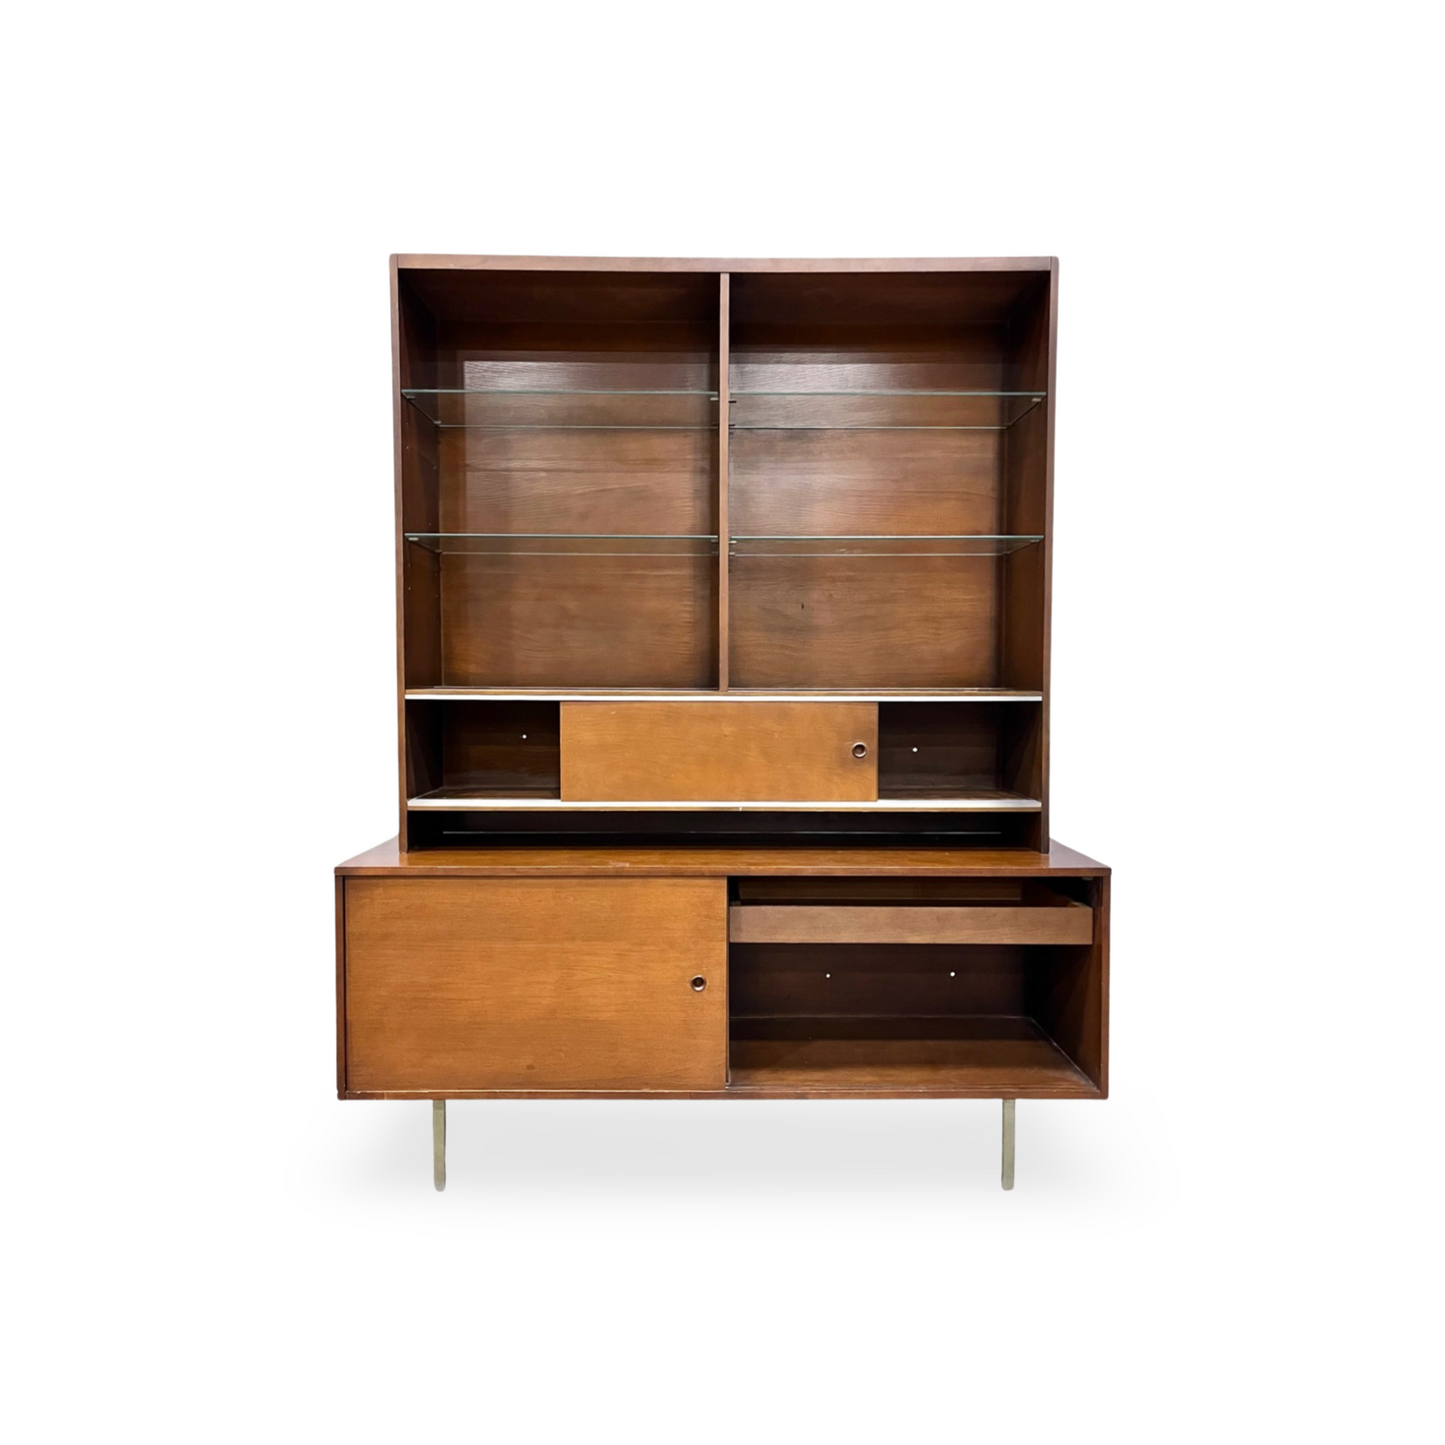 Paul Mccobb Vintage Mid Century Modern Perimeter Group Hutch and Planner Group Buffet c. 1950s